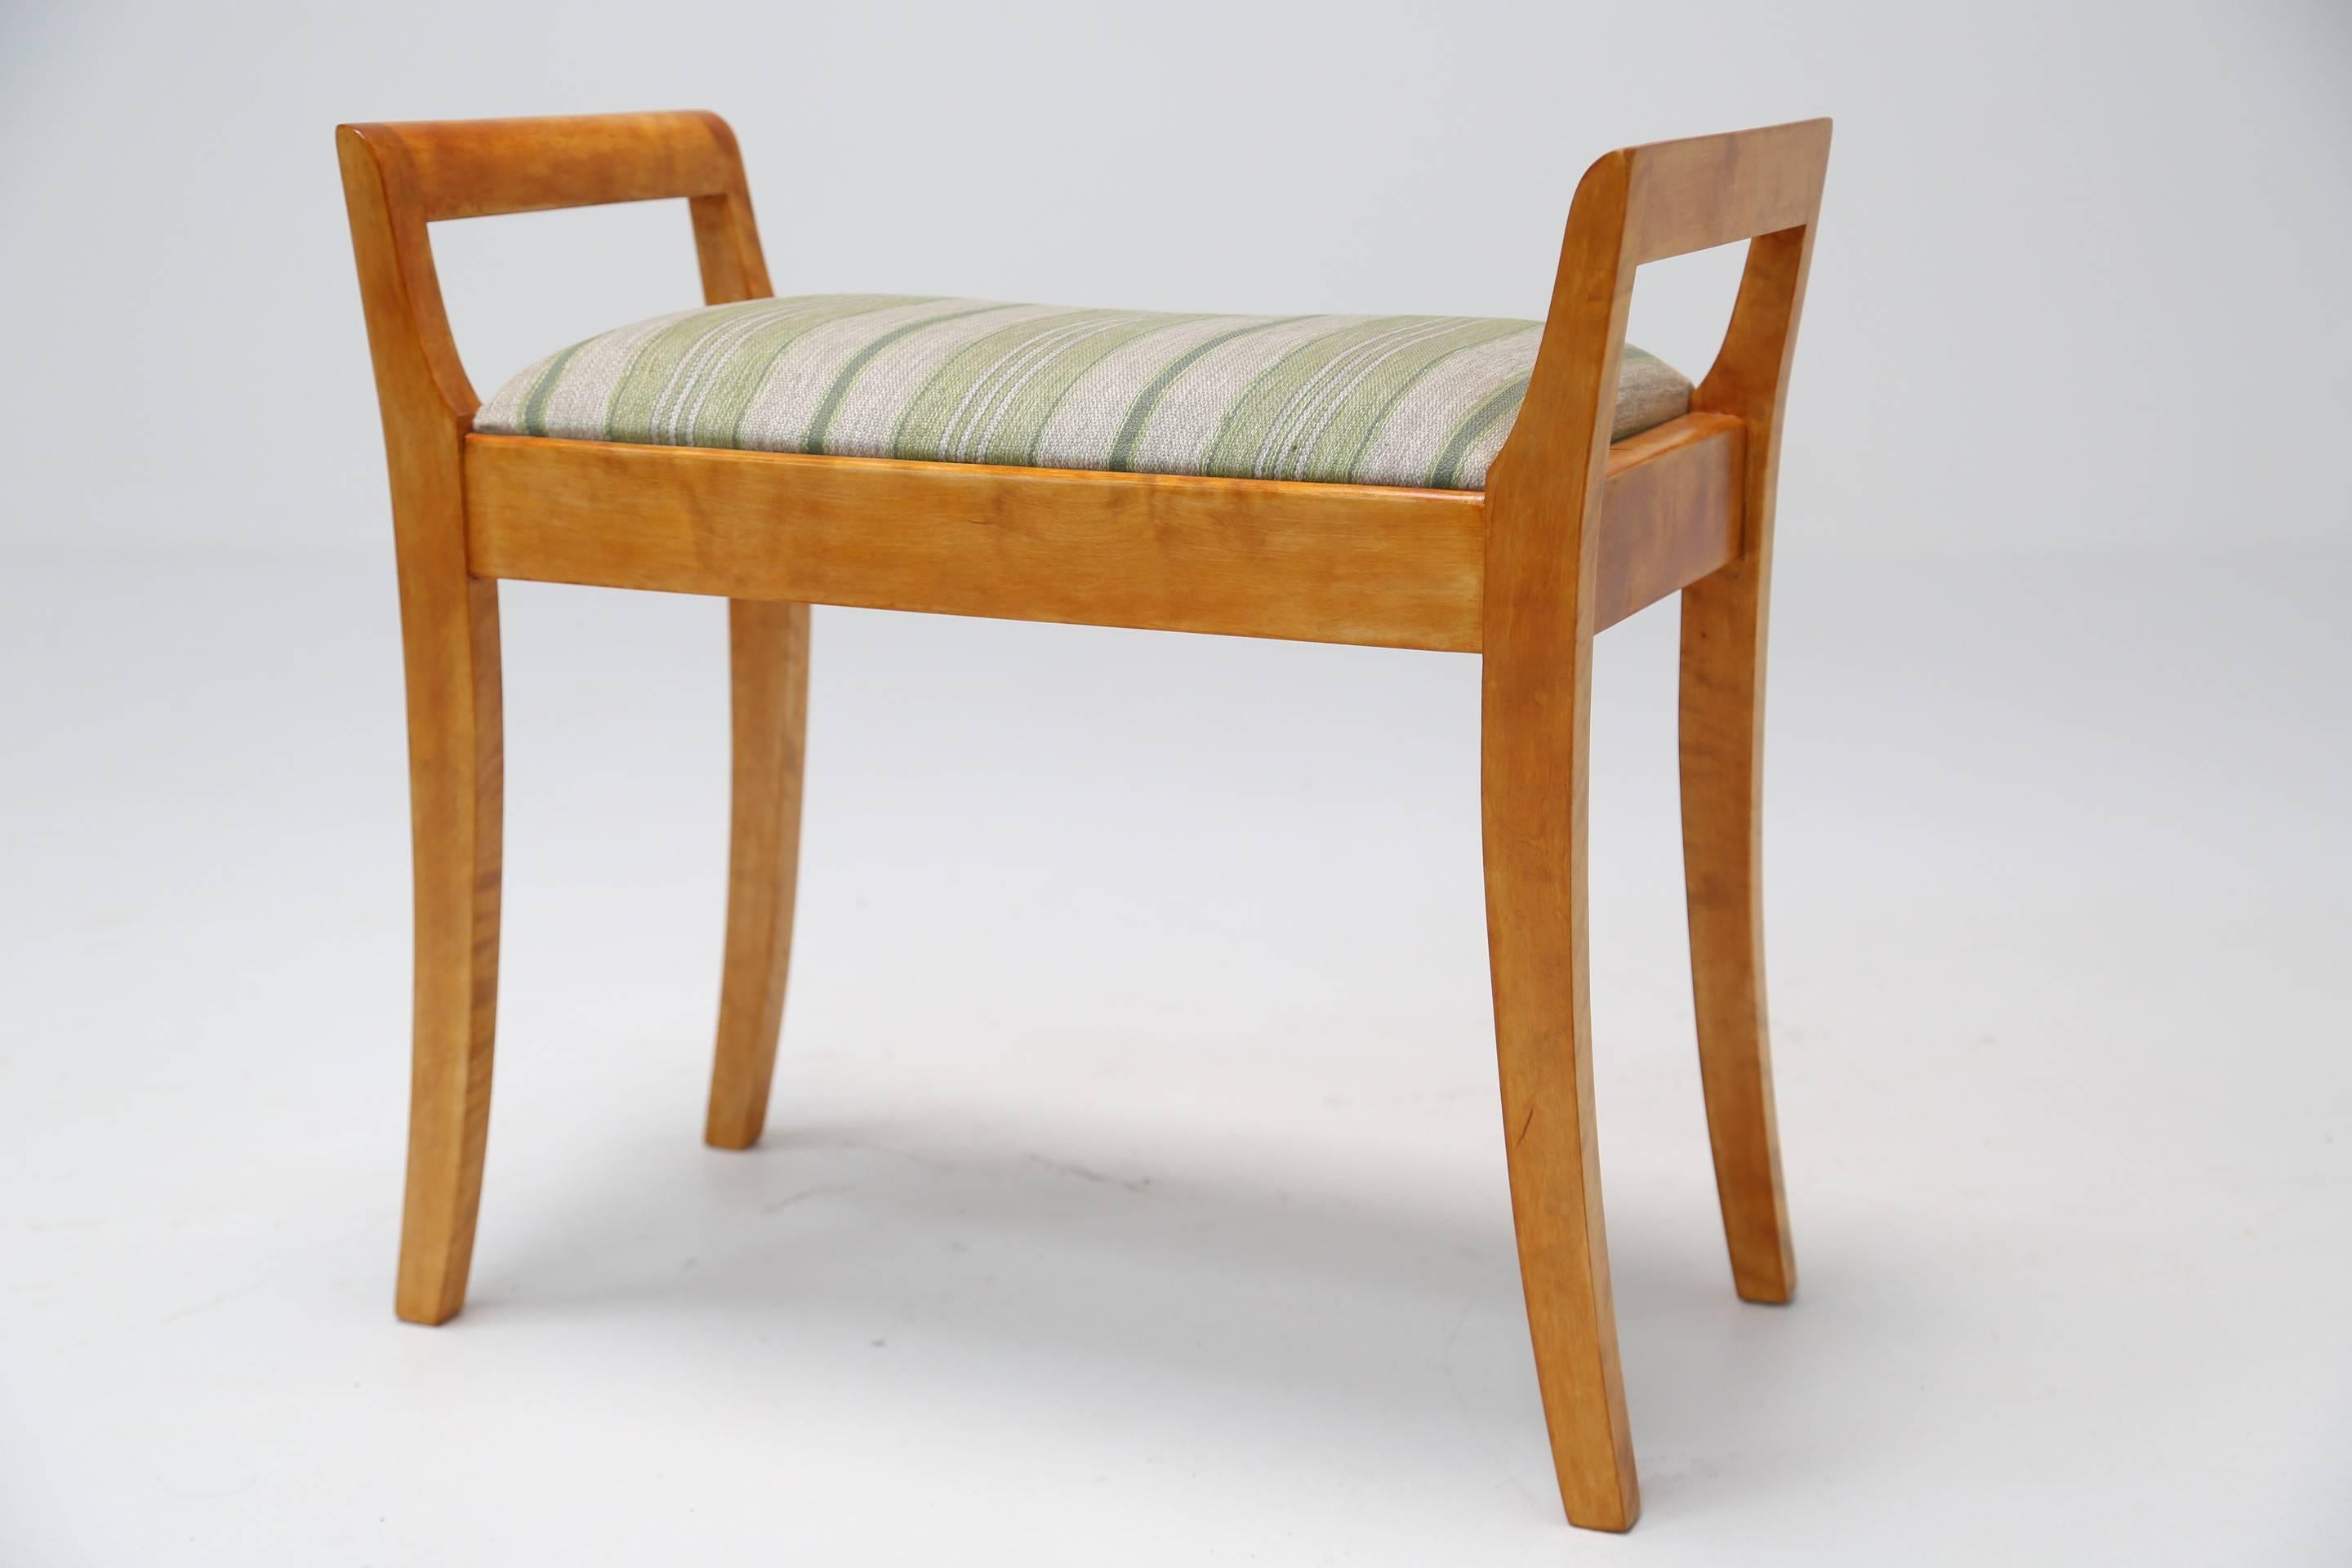 A simple yet elegant Midcentury Swedish stool with upholstered seat. The wood is beautifully smooth and has rich amber tones. Very easily shipped worldwide.